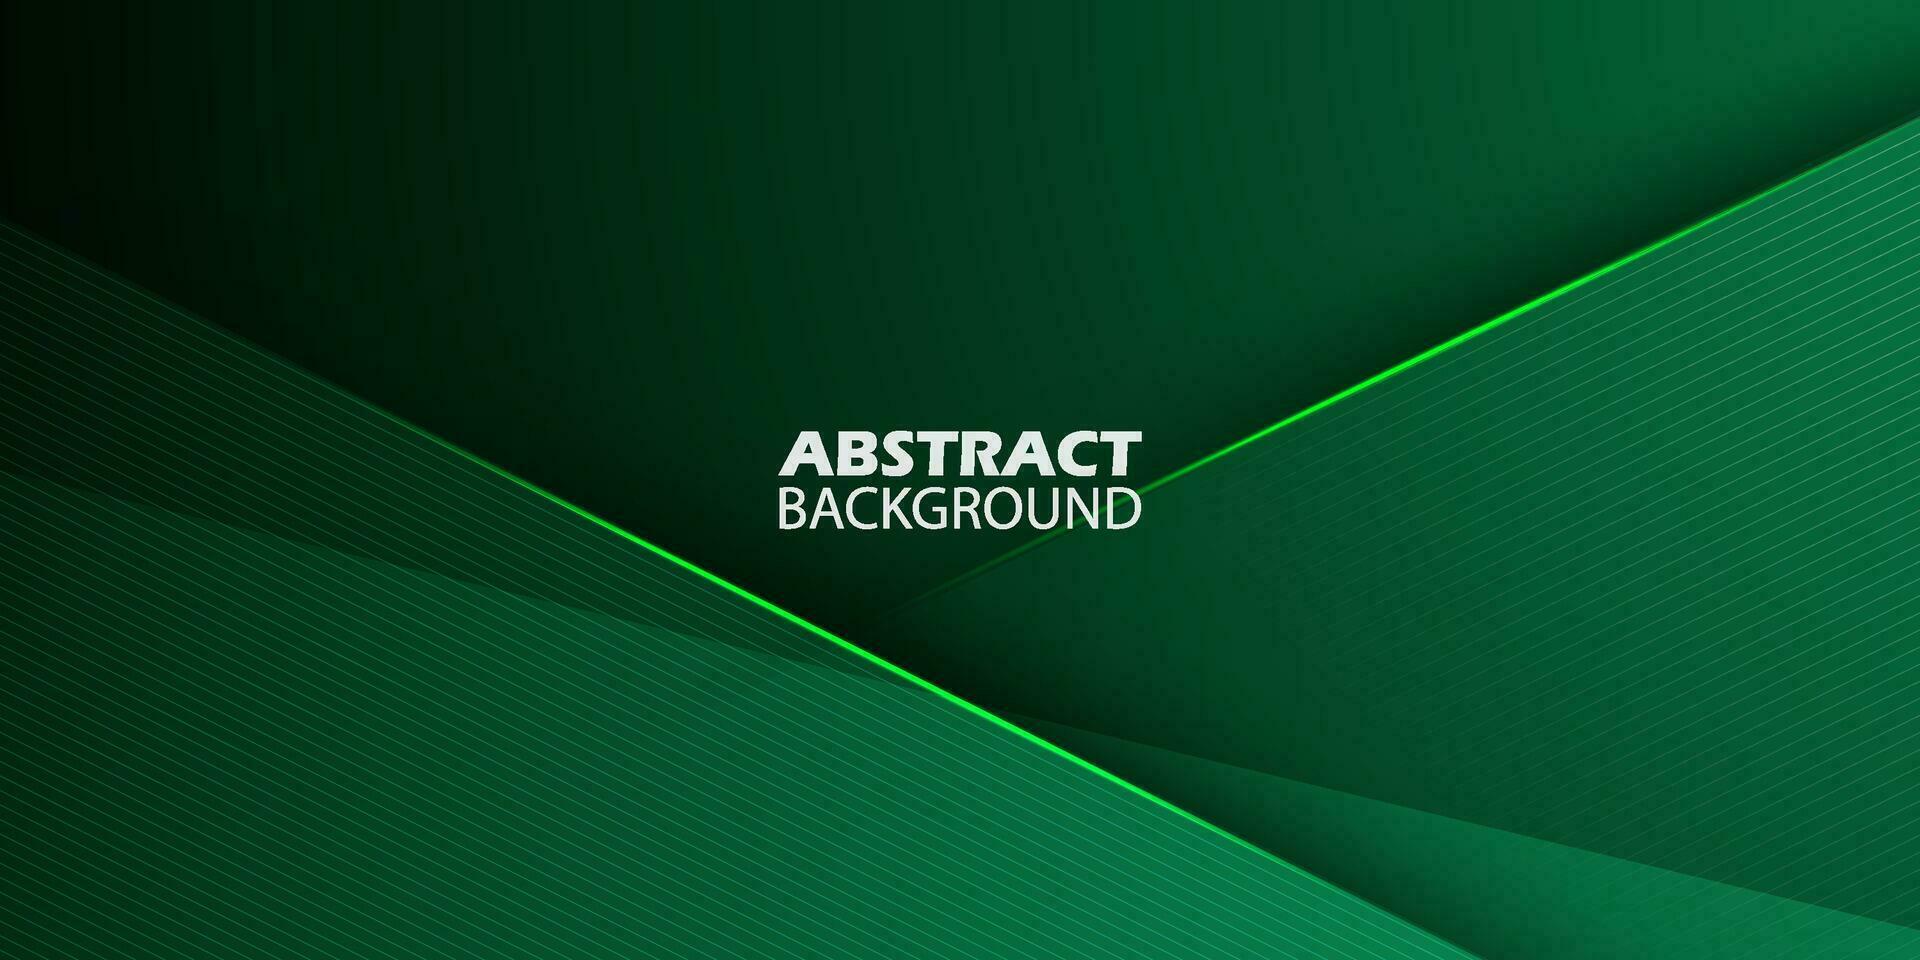 Abstract dark green background with triangle overlap shapes. Colorful green design with light and lines pattern. Simple and modern concept. Eps10 vector